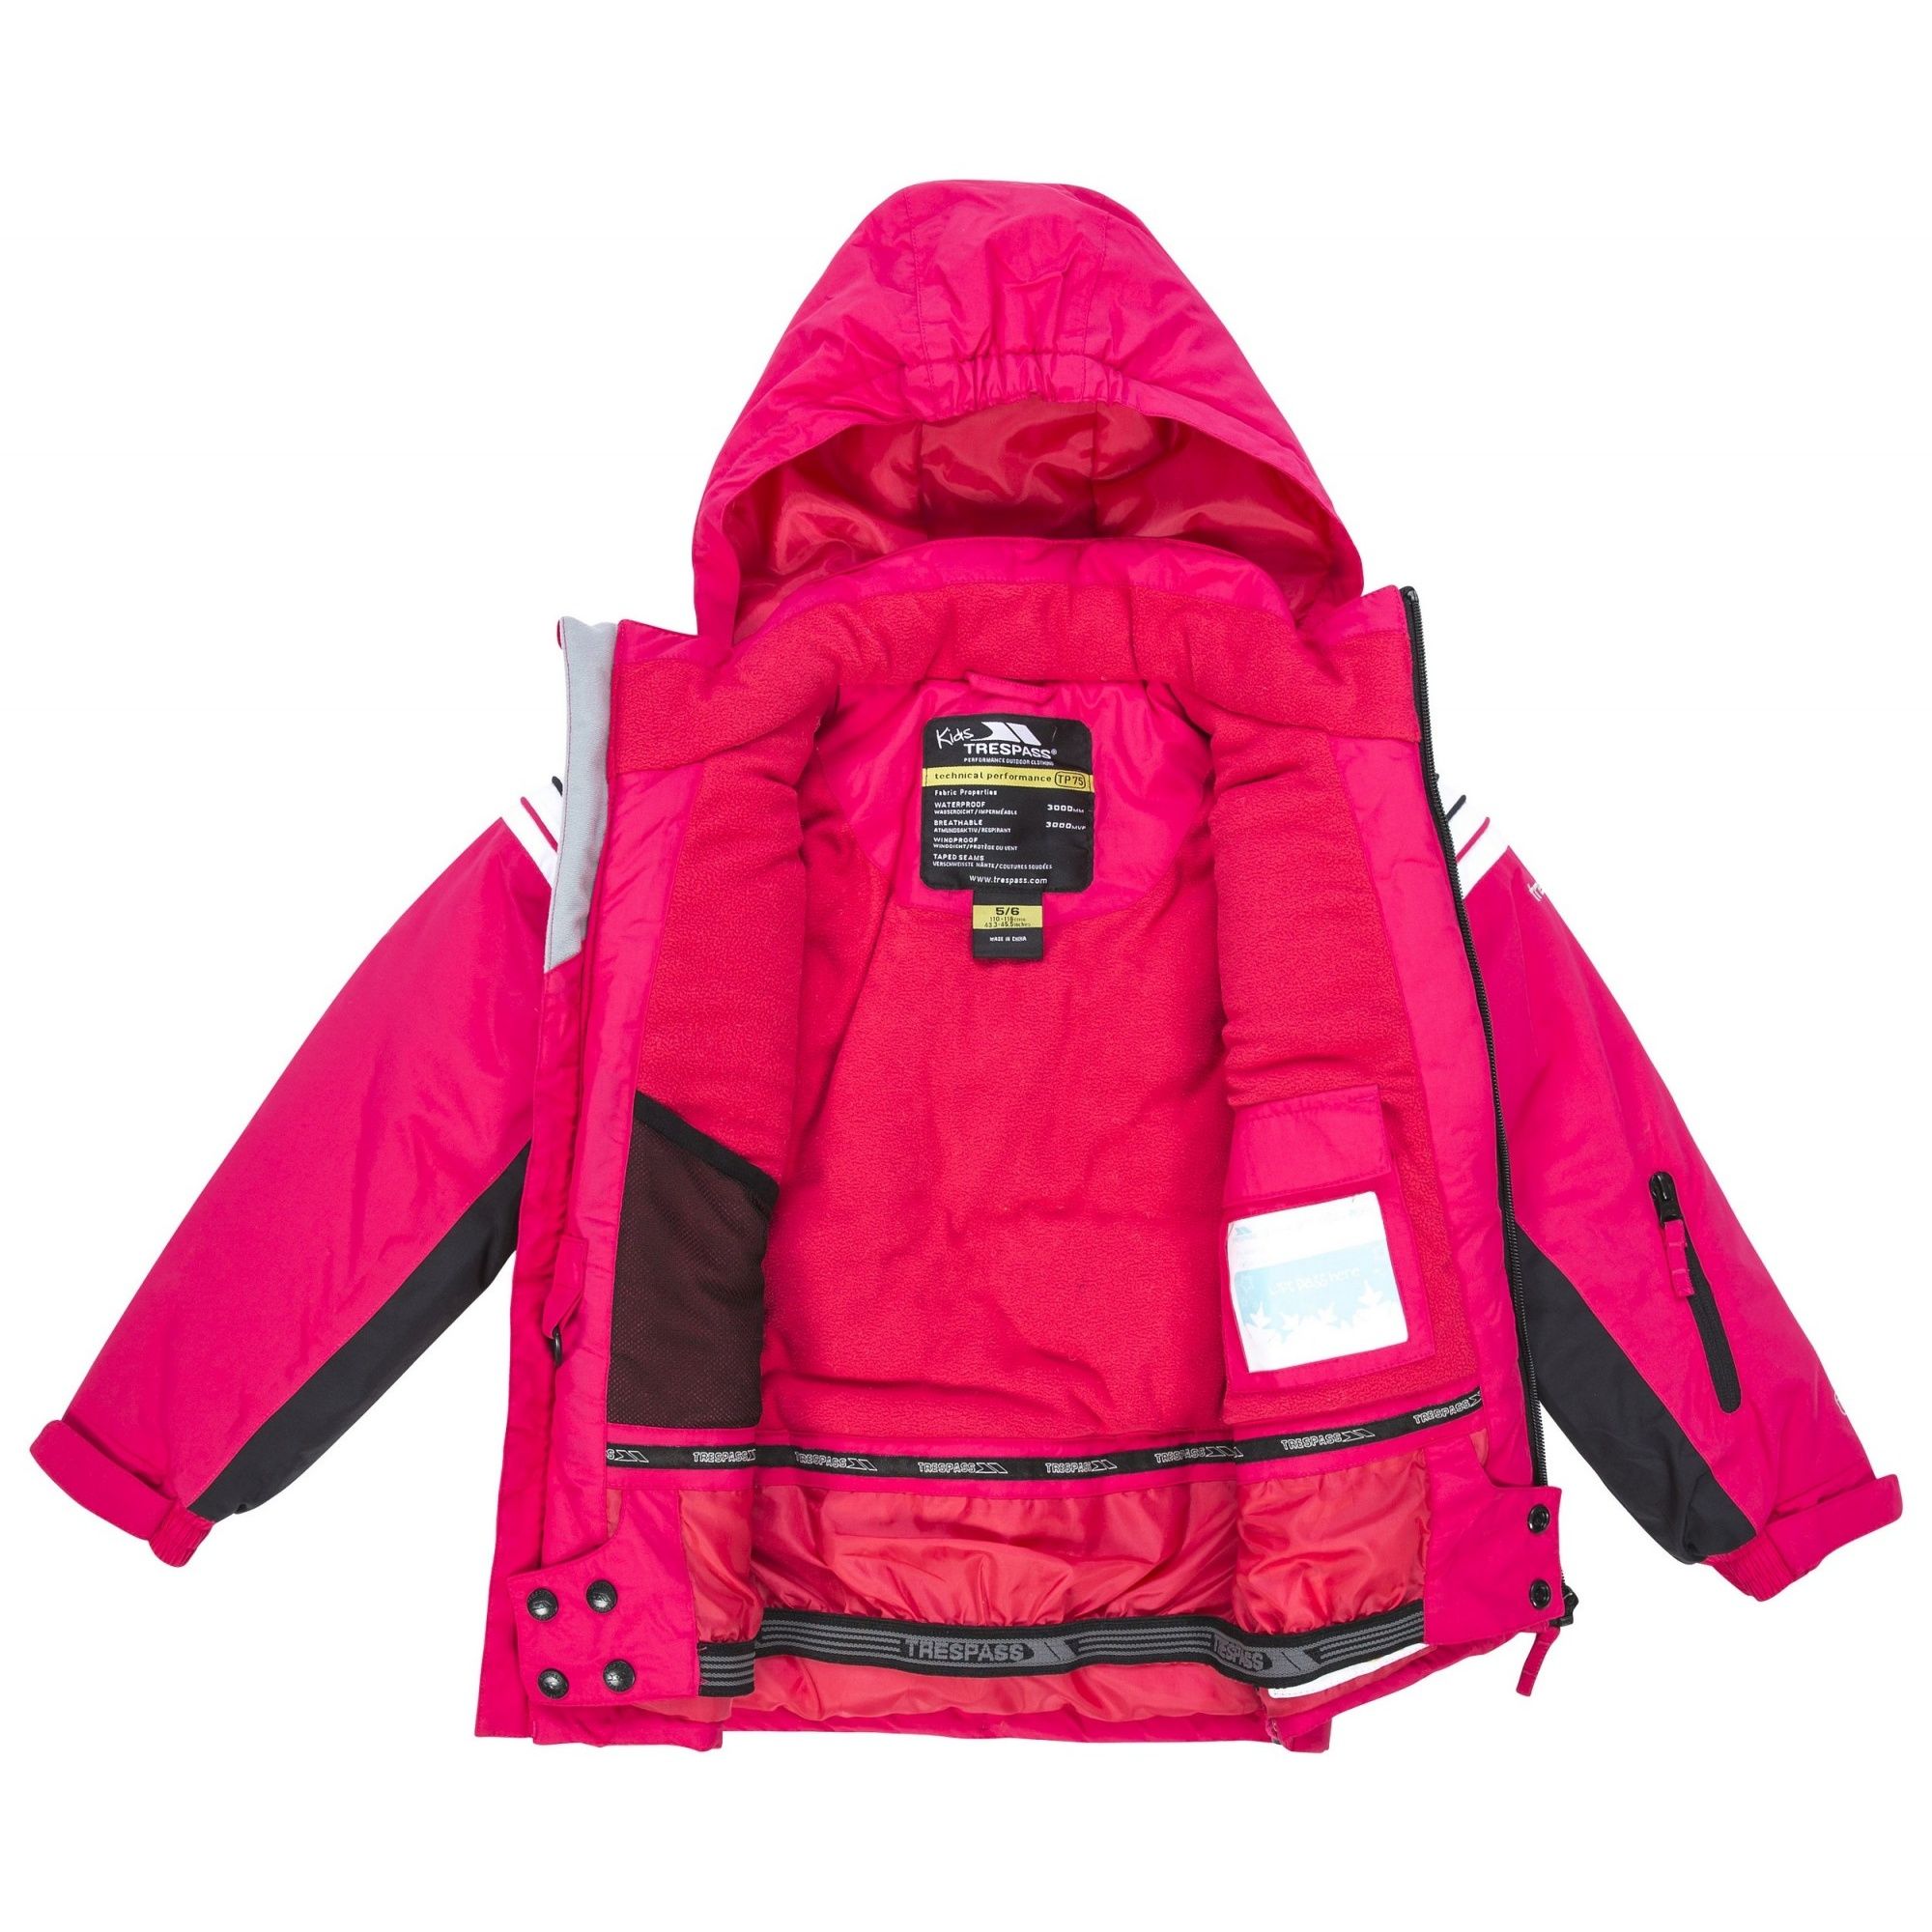 Unisex lightly padded childrens jacket, with elasticated cuffs (with hook and loop adjusters). Detachable stud off hood, inner snow break and hem draw cord. Waterproof up to 3000mm and breathable up to 3000mvp, perfect for winter. Material: Shell: 100% Polyamide PU Coating. Lining: 100% Polyester. Filling: 100% Polyester. Trespass Childrens Chest Sizing (approx): 2/3 Years - 21in/53cm, 3/4 Years - 22in/56cm, 5/6 Years - 24in/61cm, 7/8 Years - 26in/66cm, 9/10 Years - 28in/71cm, 11/12 Years - 31in/79cm.